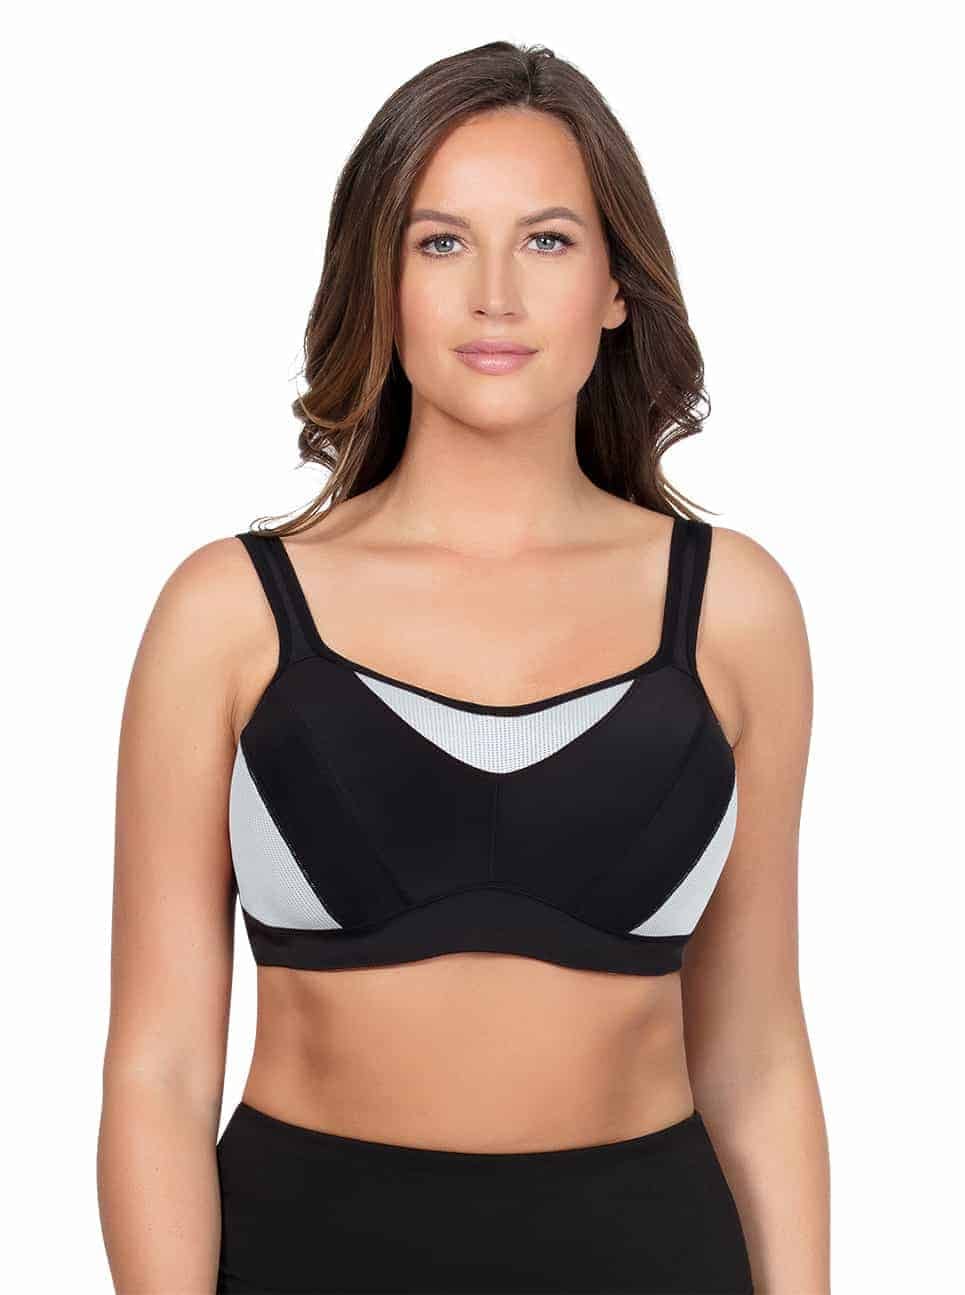 Anita Active Light and Firm Wire-Free Sports Bra 32A, Black at   Women's Clothing store: Sports Bras